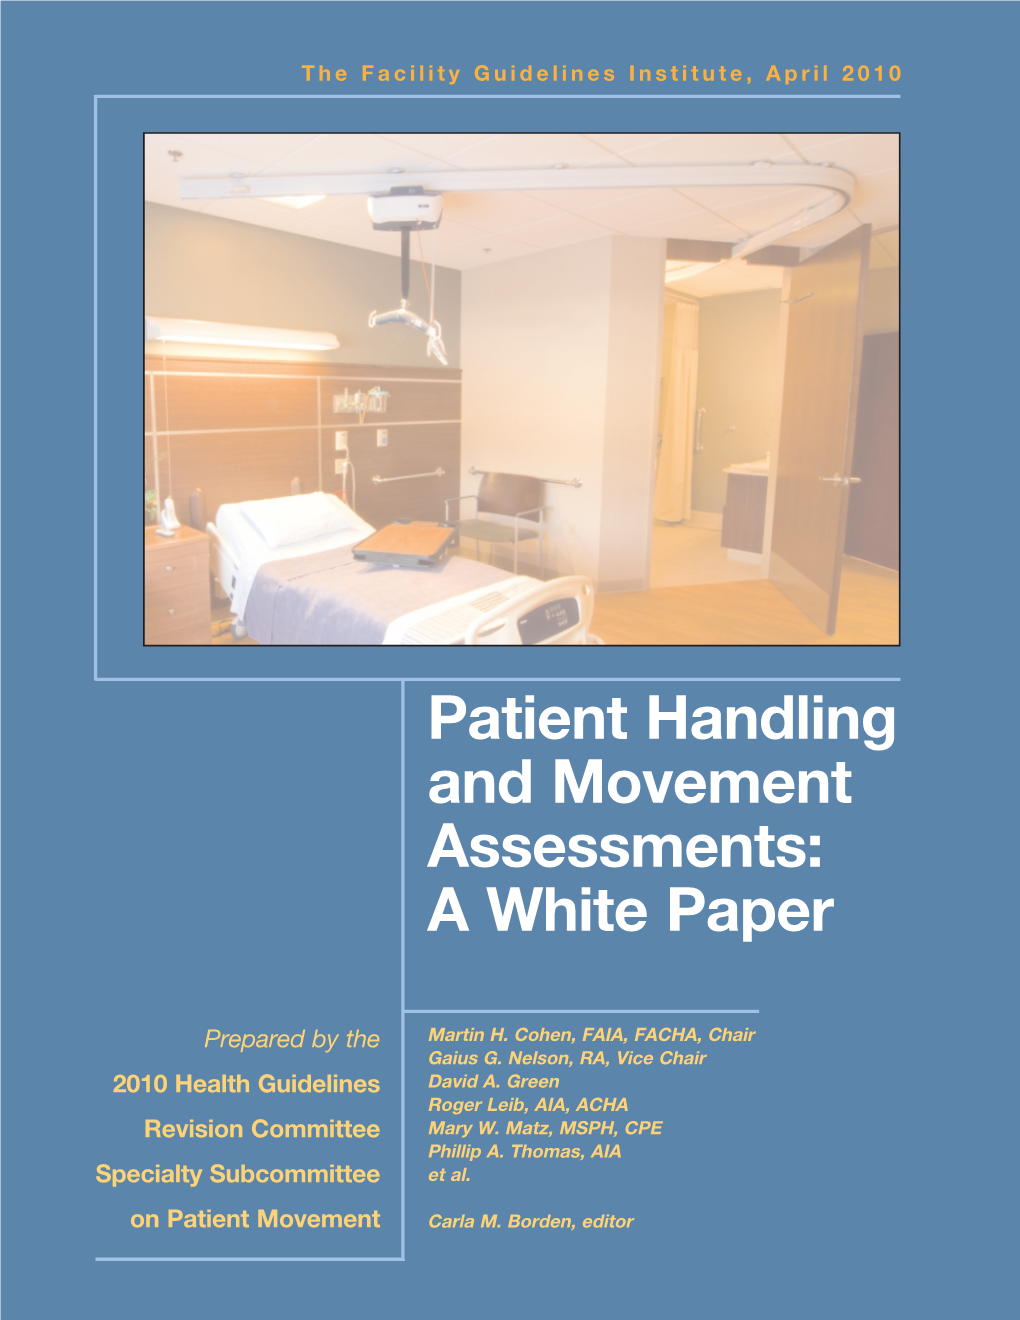 Patient Handling and Movement Assessments: a White Paper